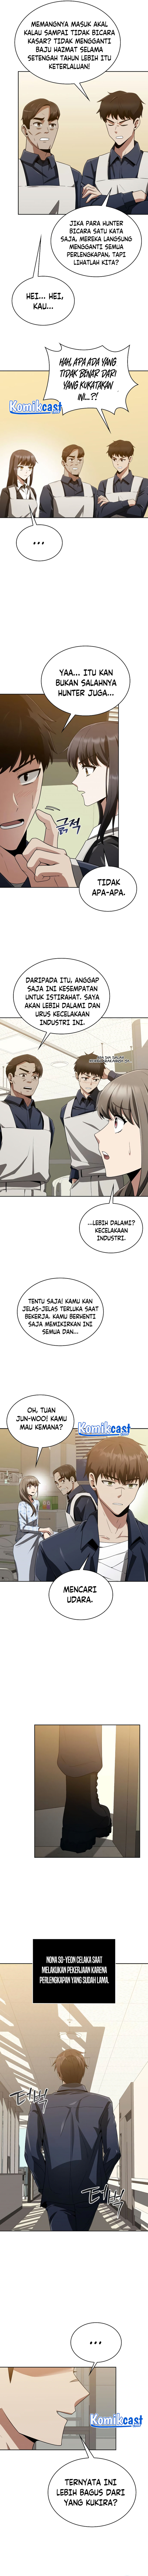 Dilarang COPAS - situs resmi www.mangacanblog.com - Komik clever cleaning life of the returned genius hunter 009 - chapter 9 10 Indonesia clever cleaning life of the returned genius hunter 009 - chapter 9 Terbaru 7|Baca Manga Komik Indonesia|Mangacan